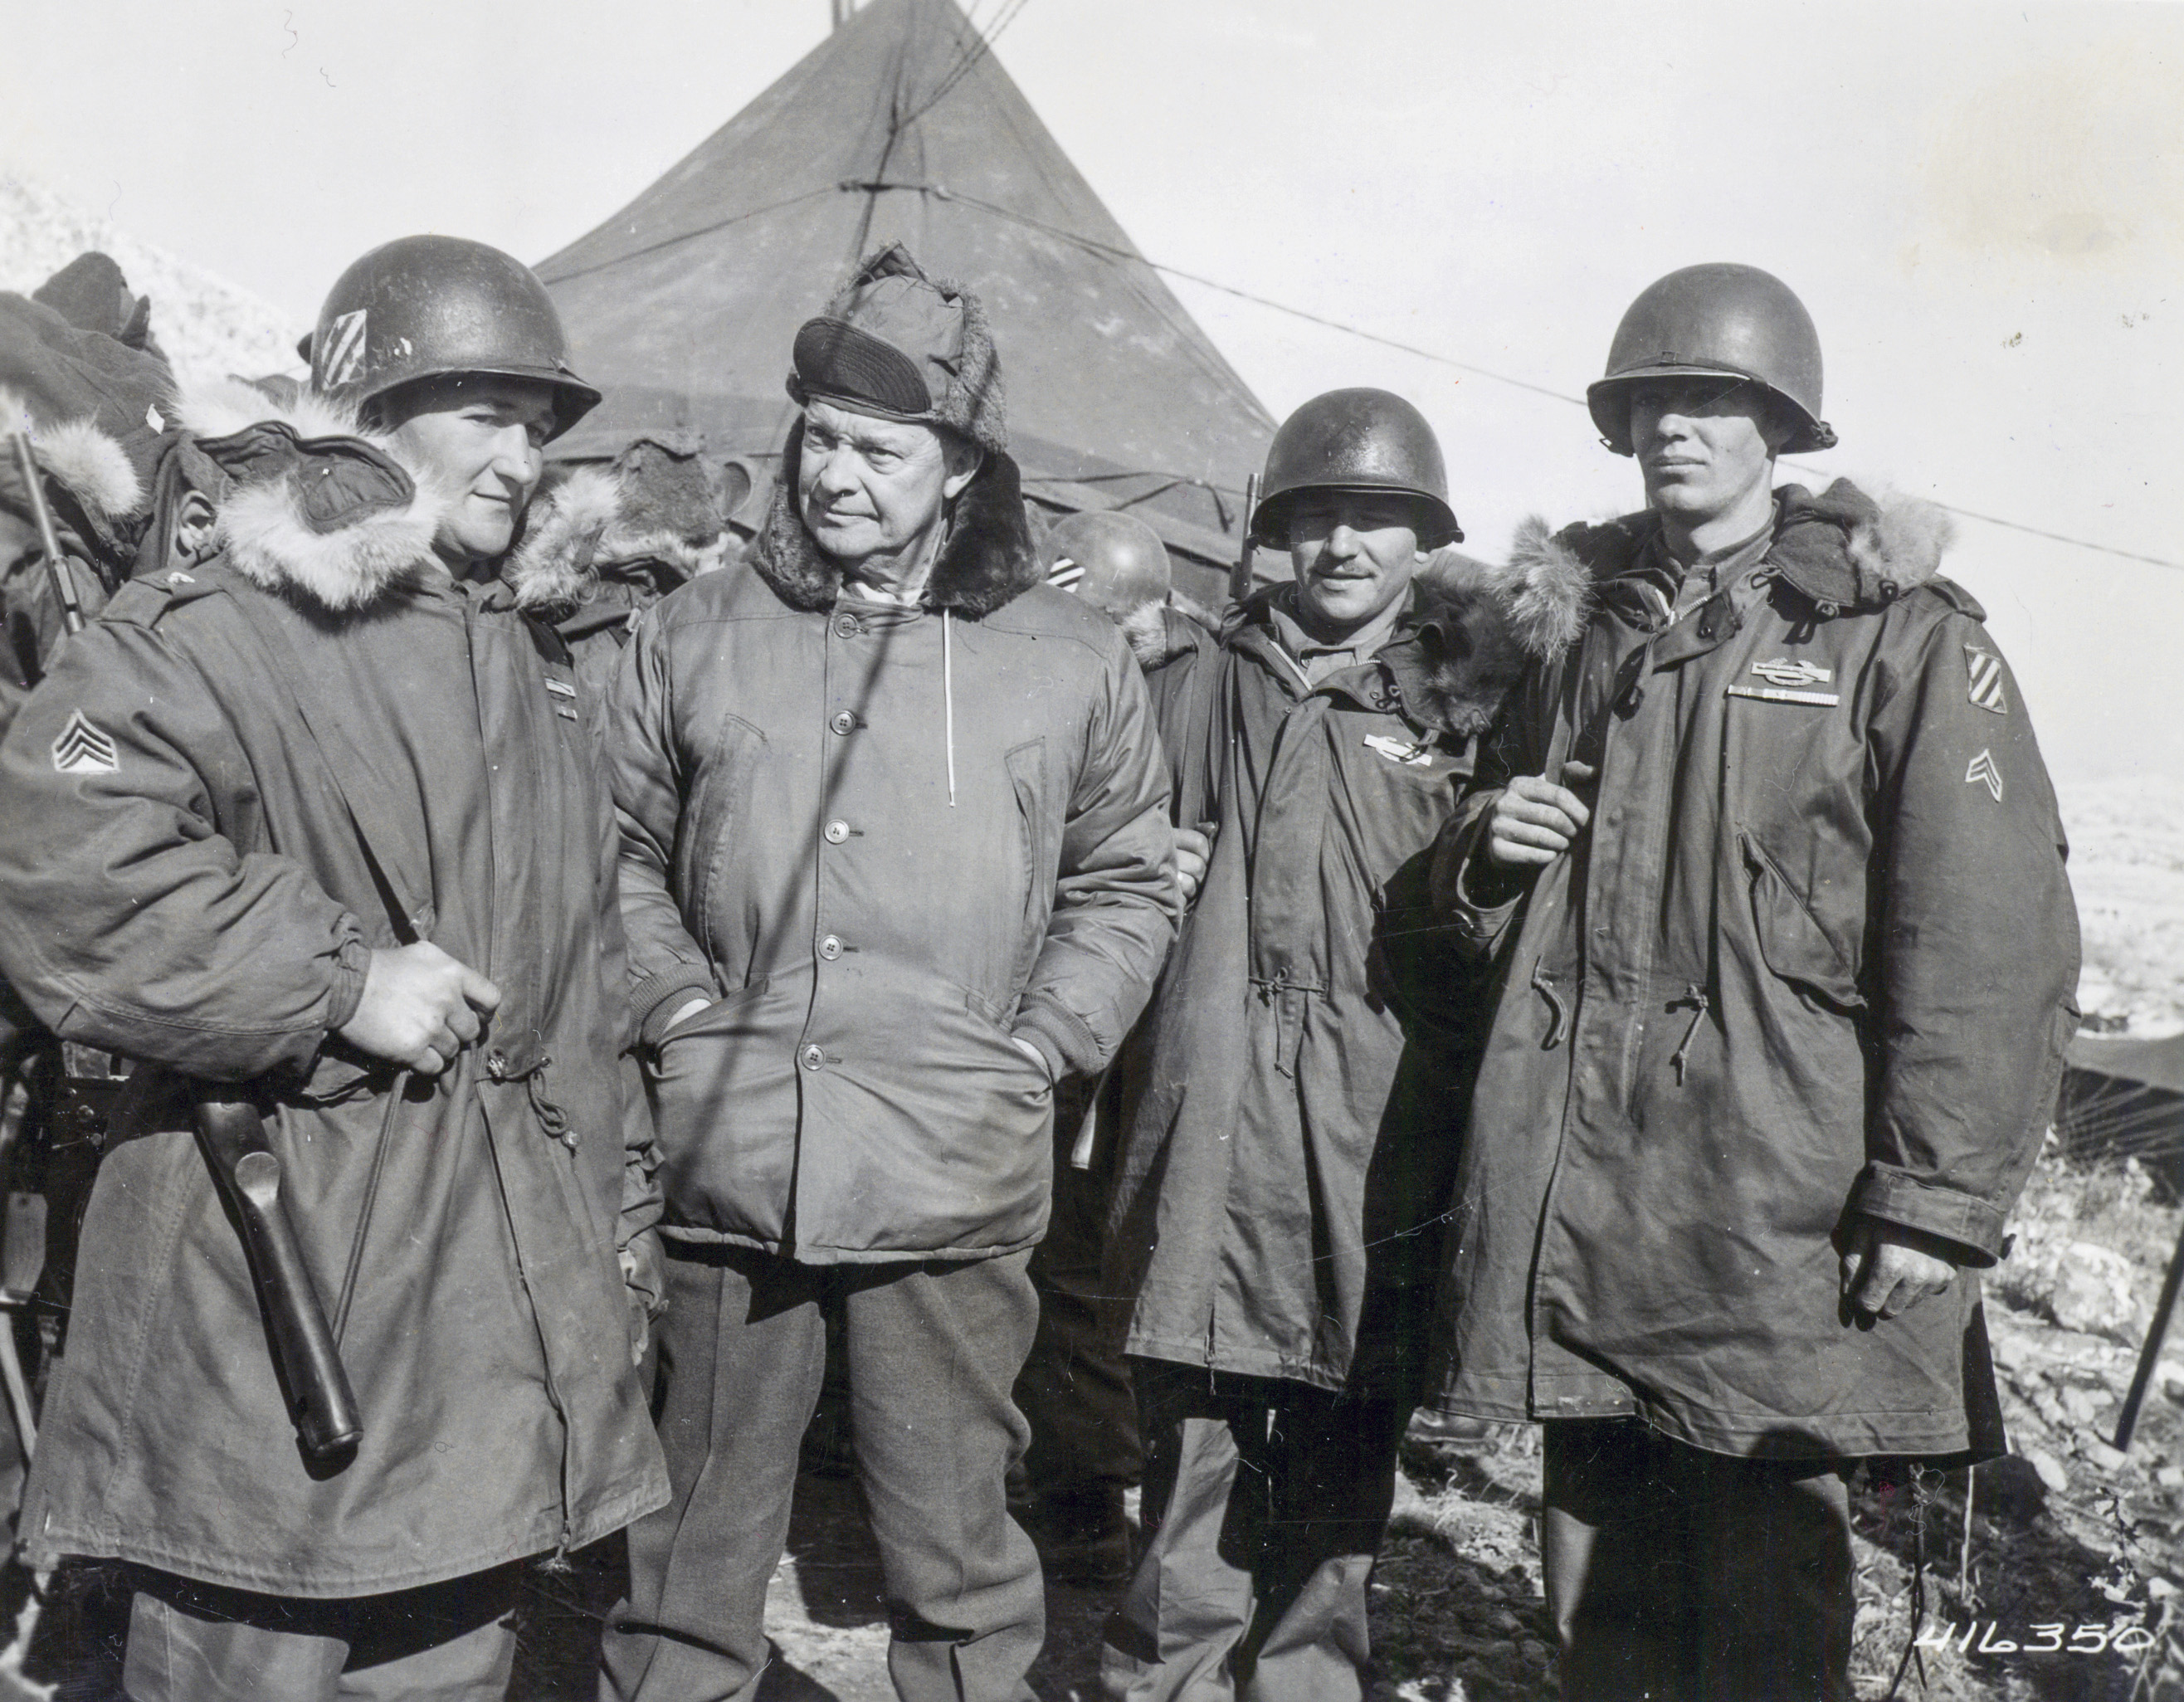 A black and white picture of Dwight Eisenhower standing with three soldiers during the Korean War. All four men are wearing heavy winter coats and are standing in from of a tent.